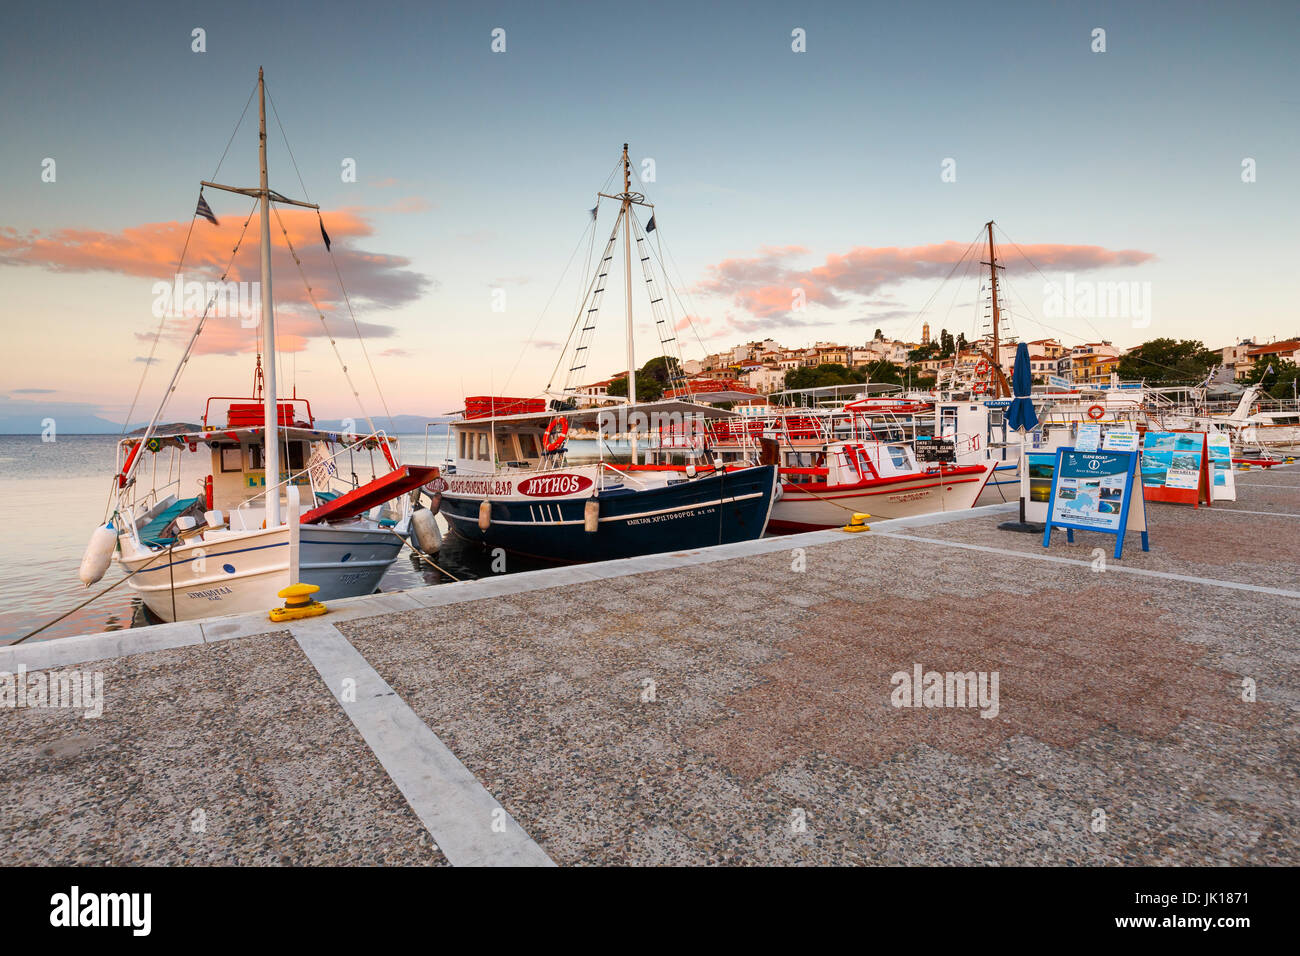 Morning view of the harbour on Skiathos island, Greece. Stock Photo